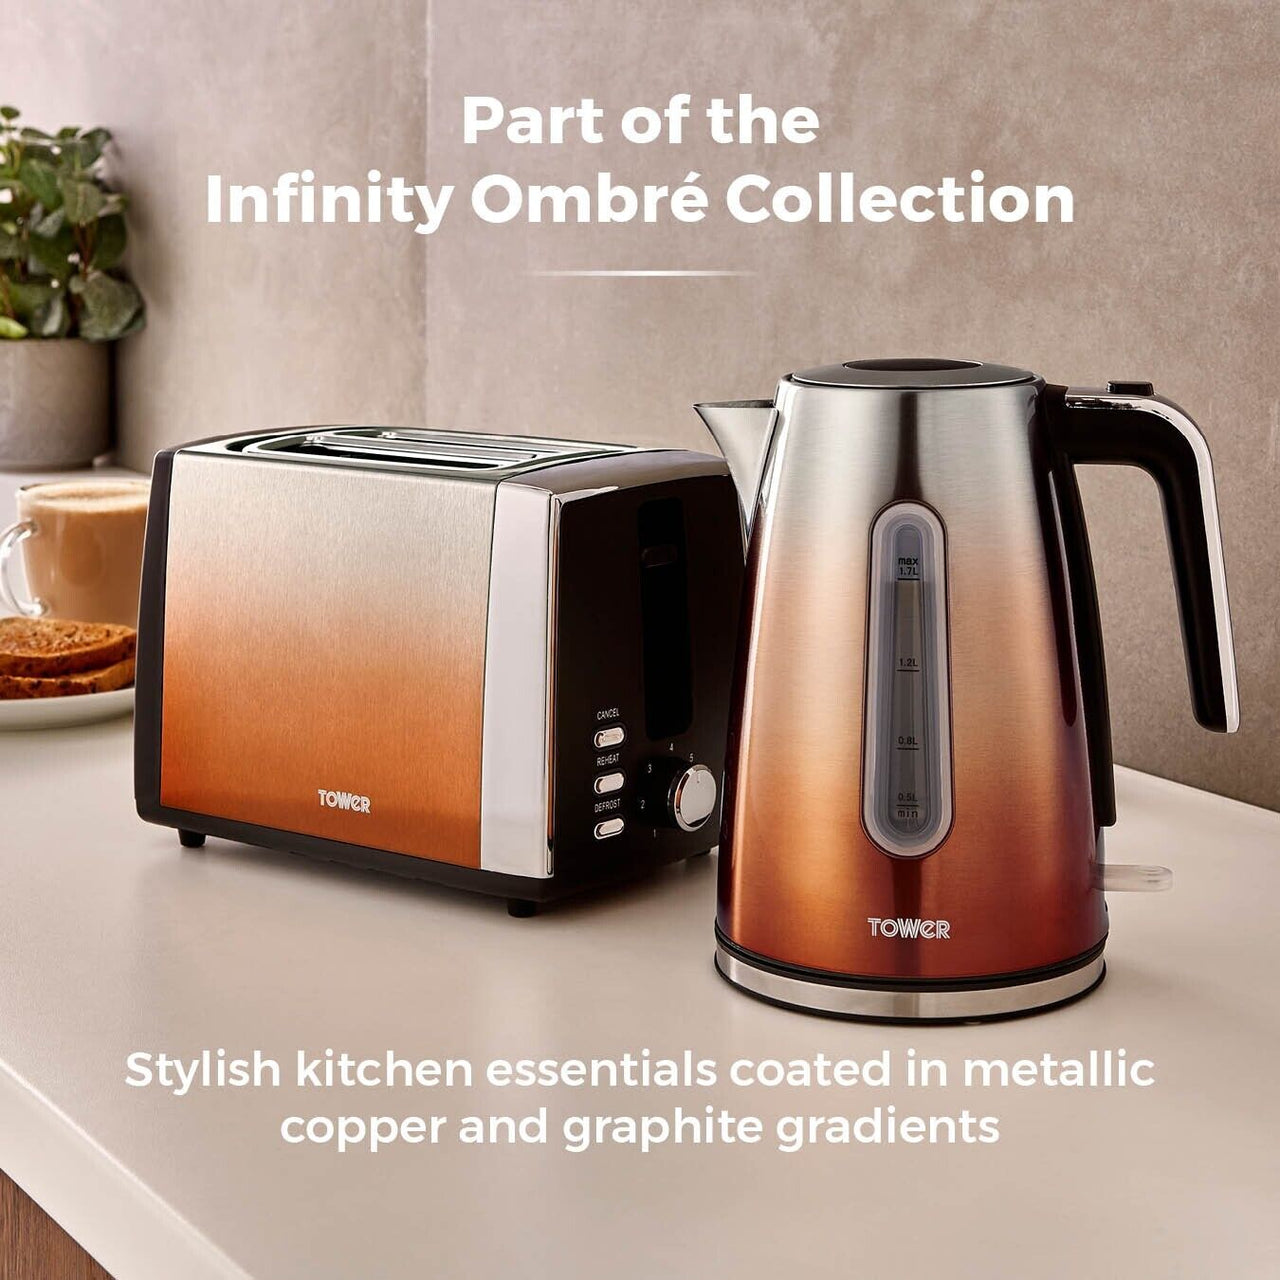 Tower Infinity Ombre Copper Kettle Toaster Bread Bin Canisters Kitchen Set of 6